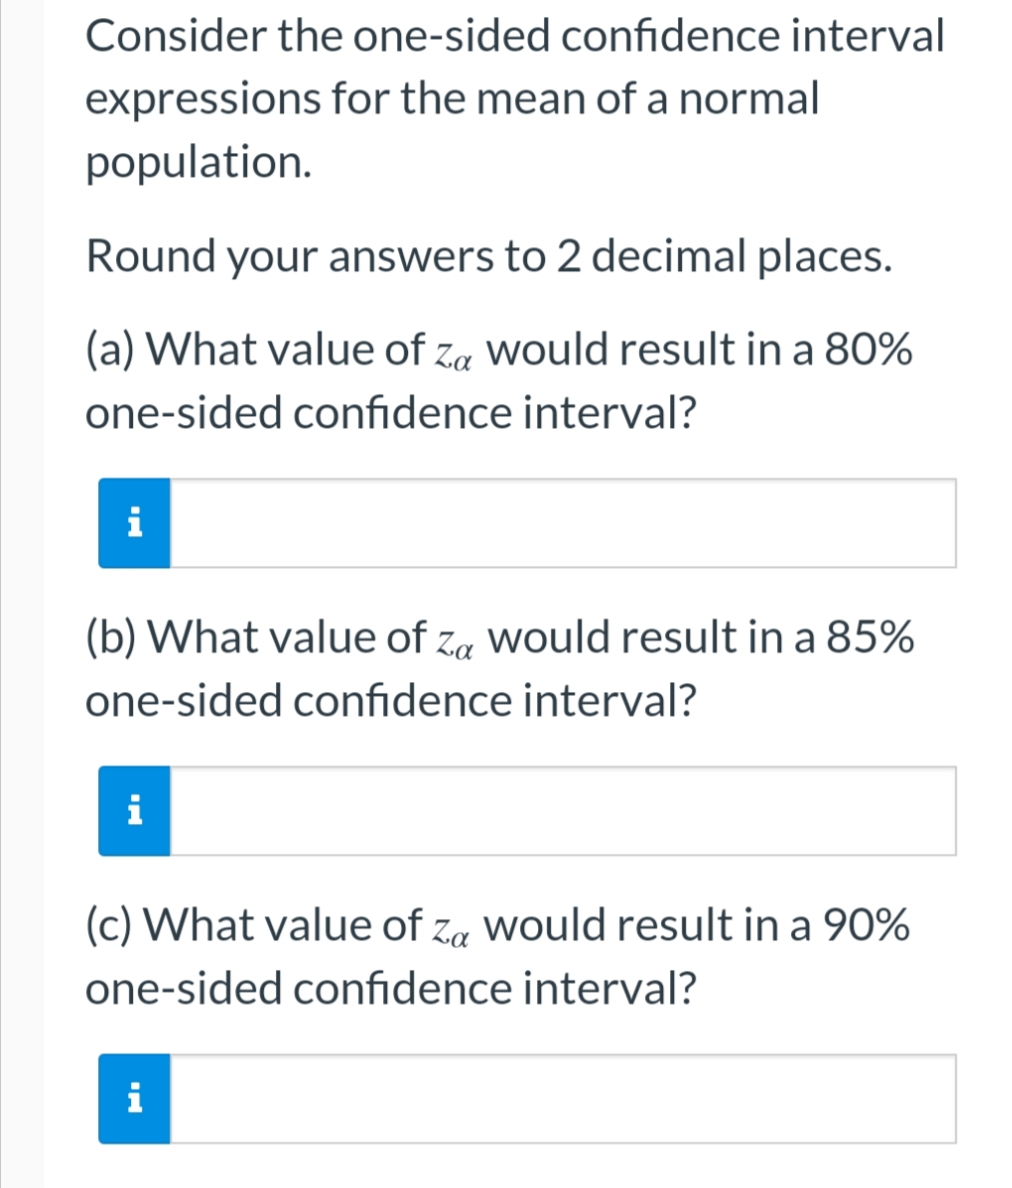 Consider the one-sided confidence interval
expressions for the mean of a normal
population.
Round your answers to 2 decimal places.
(a) What value of Za would result in a 80%
one-sided confidence interval?
i
(b) What value of Za would result in a 85%
one-sided confidence interval?
i
(c) What value of Za would result in a 90%
one-sided confidence interval?
i